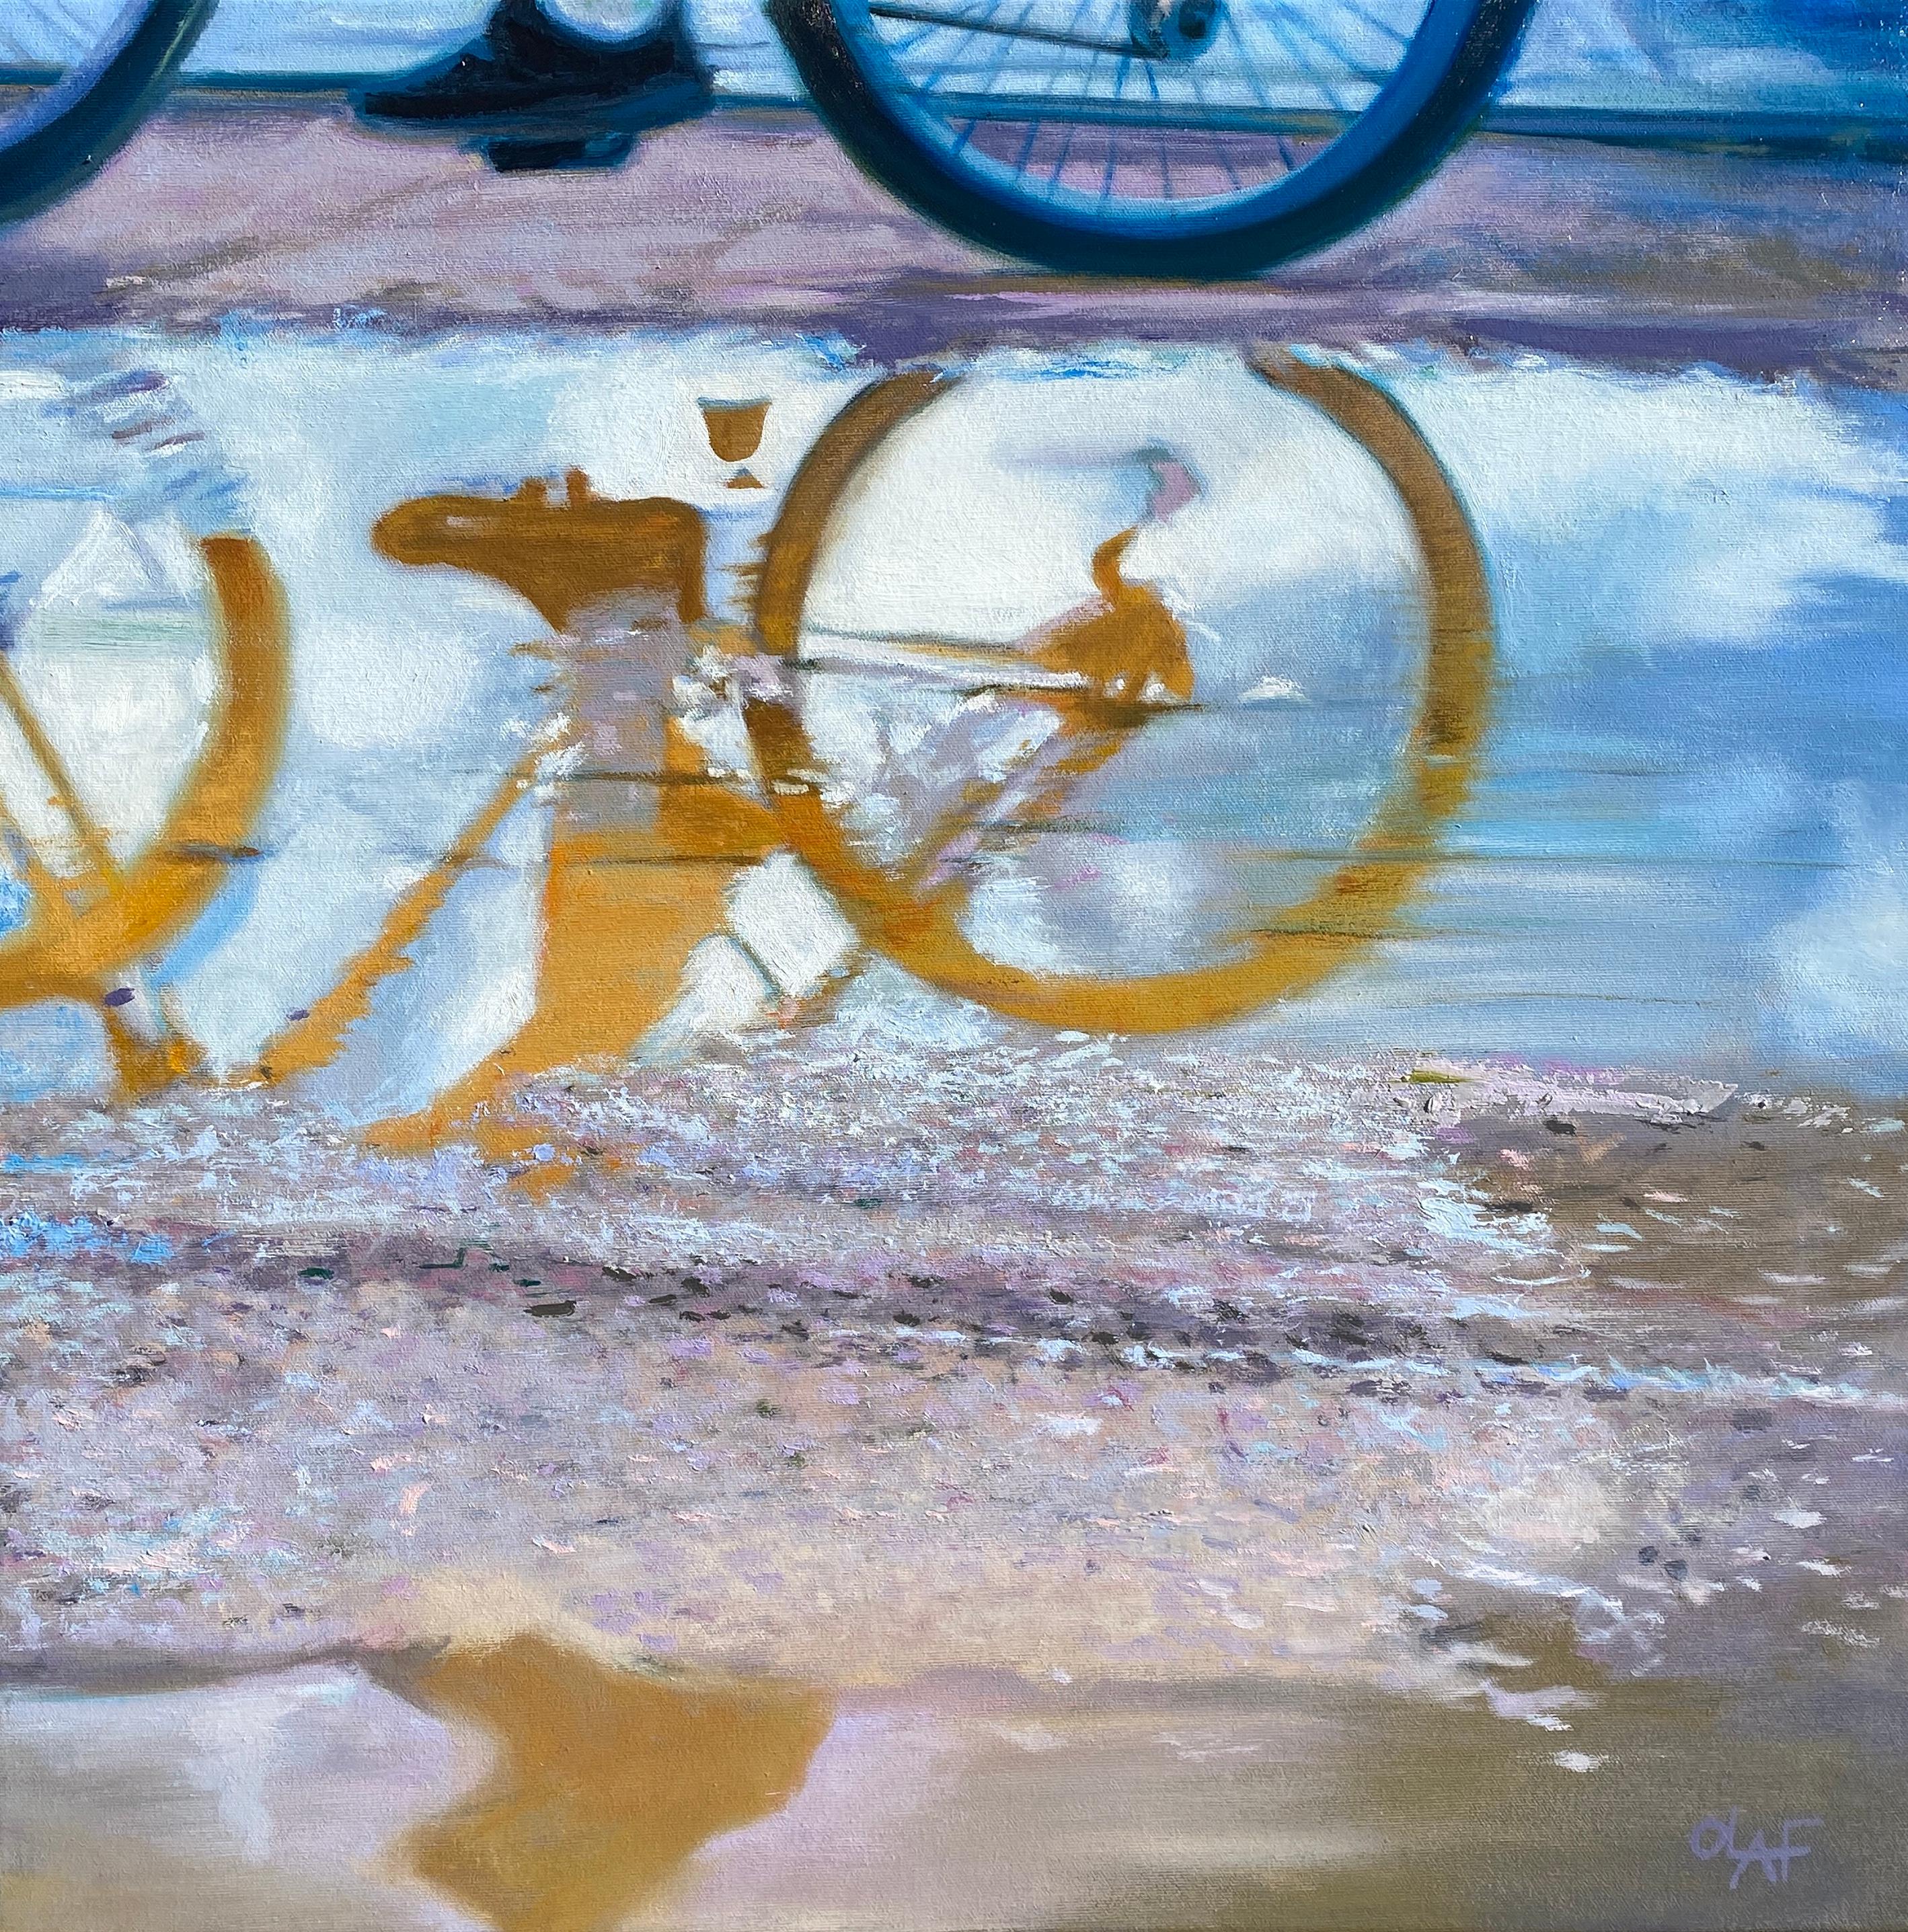 Olaf Schneider, "Riding Home", 20x16 Rainy Reflection Oil Painting on Canvas